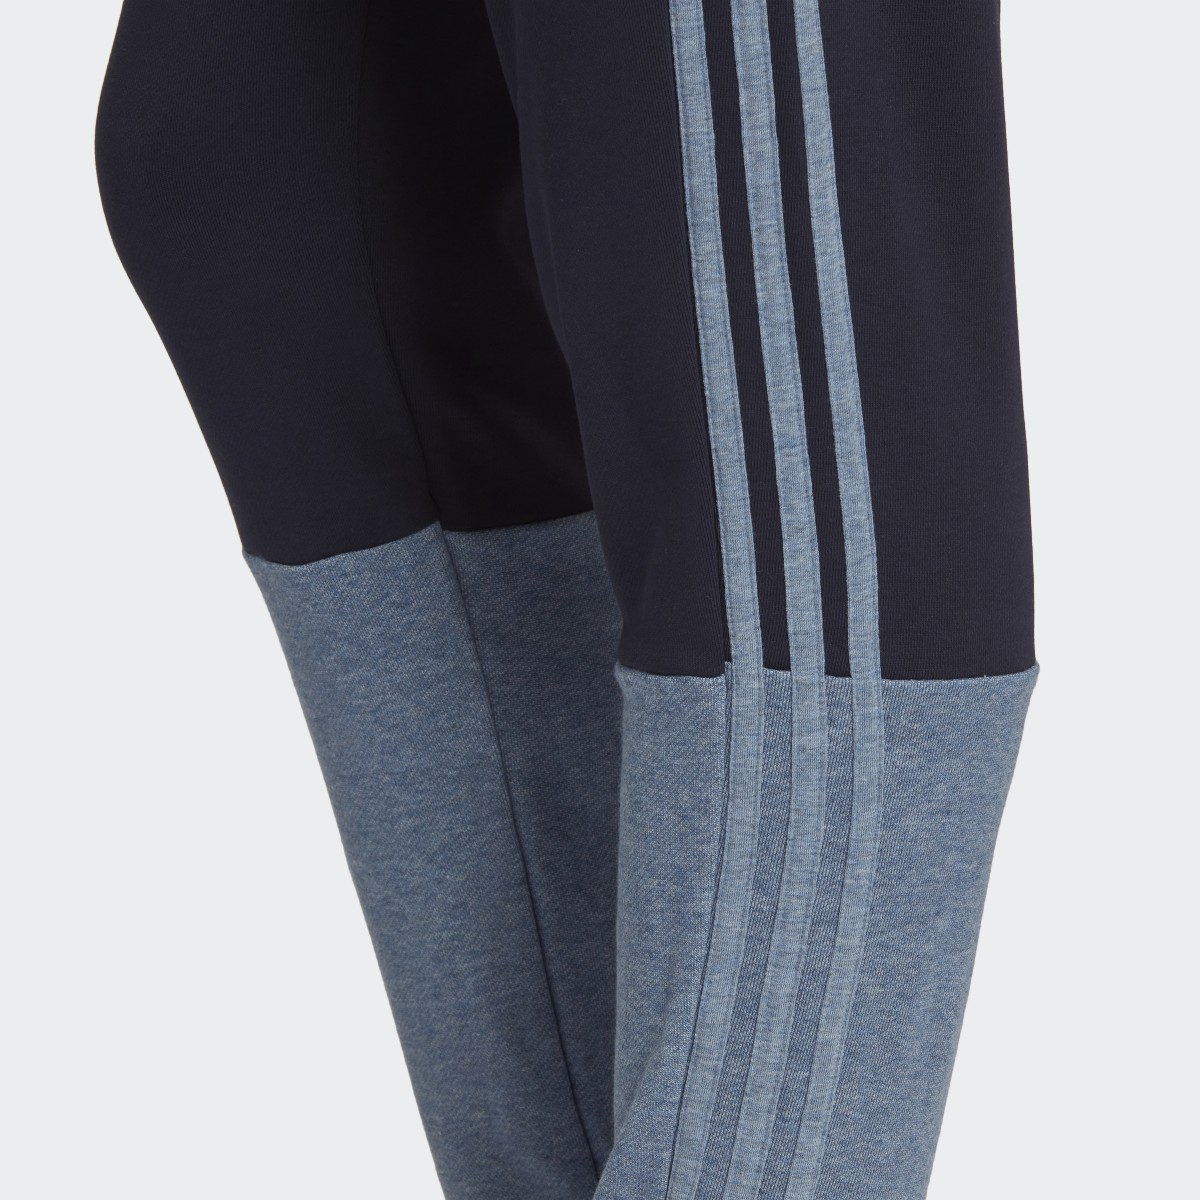 Adidas Essentials Mélange French Terry Pants. 6